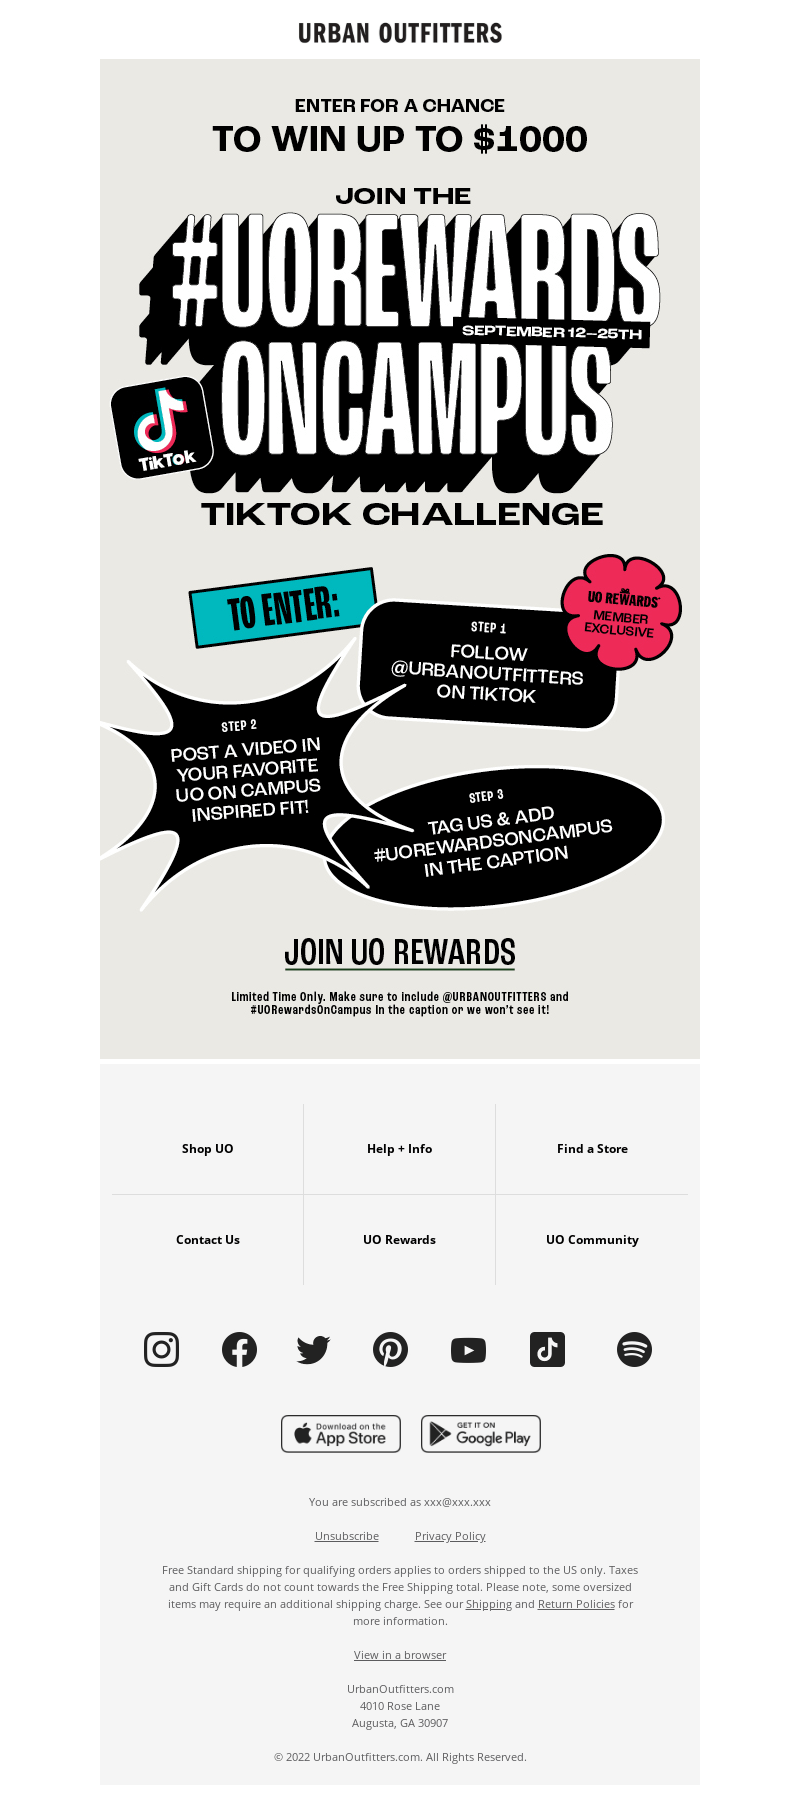 An email from Urban Outfitters that offers loyalty program members to join a TikTok challenge and win money